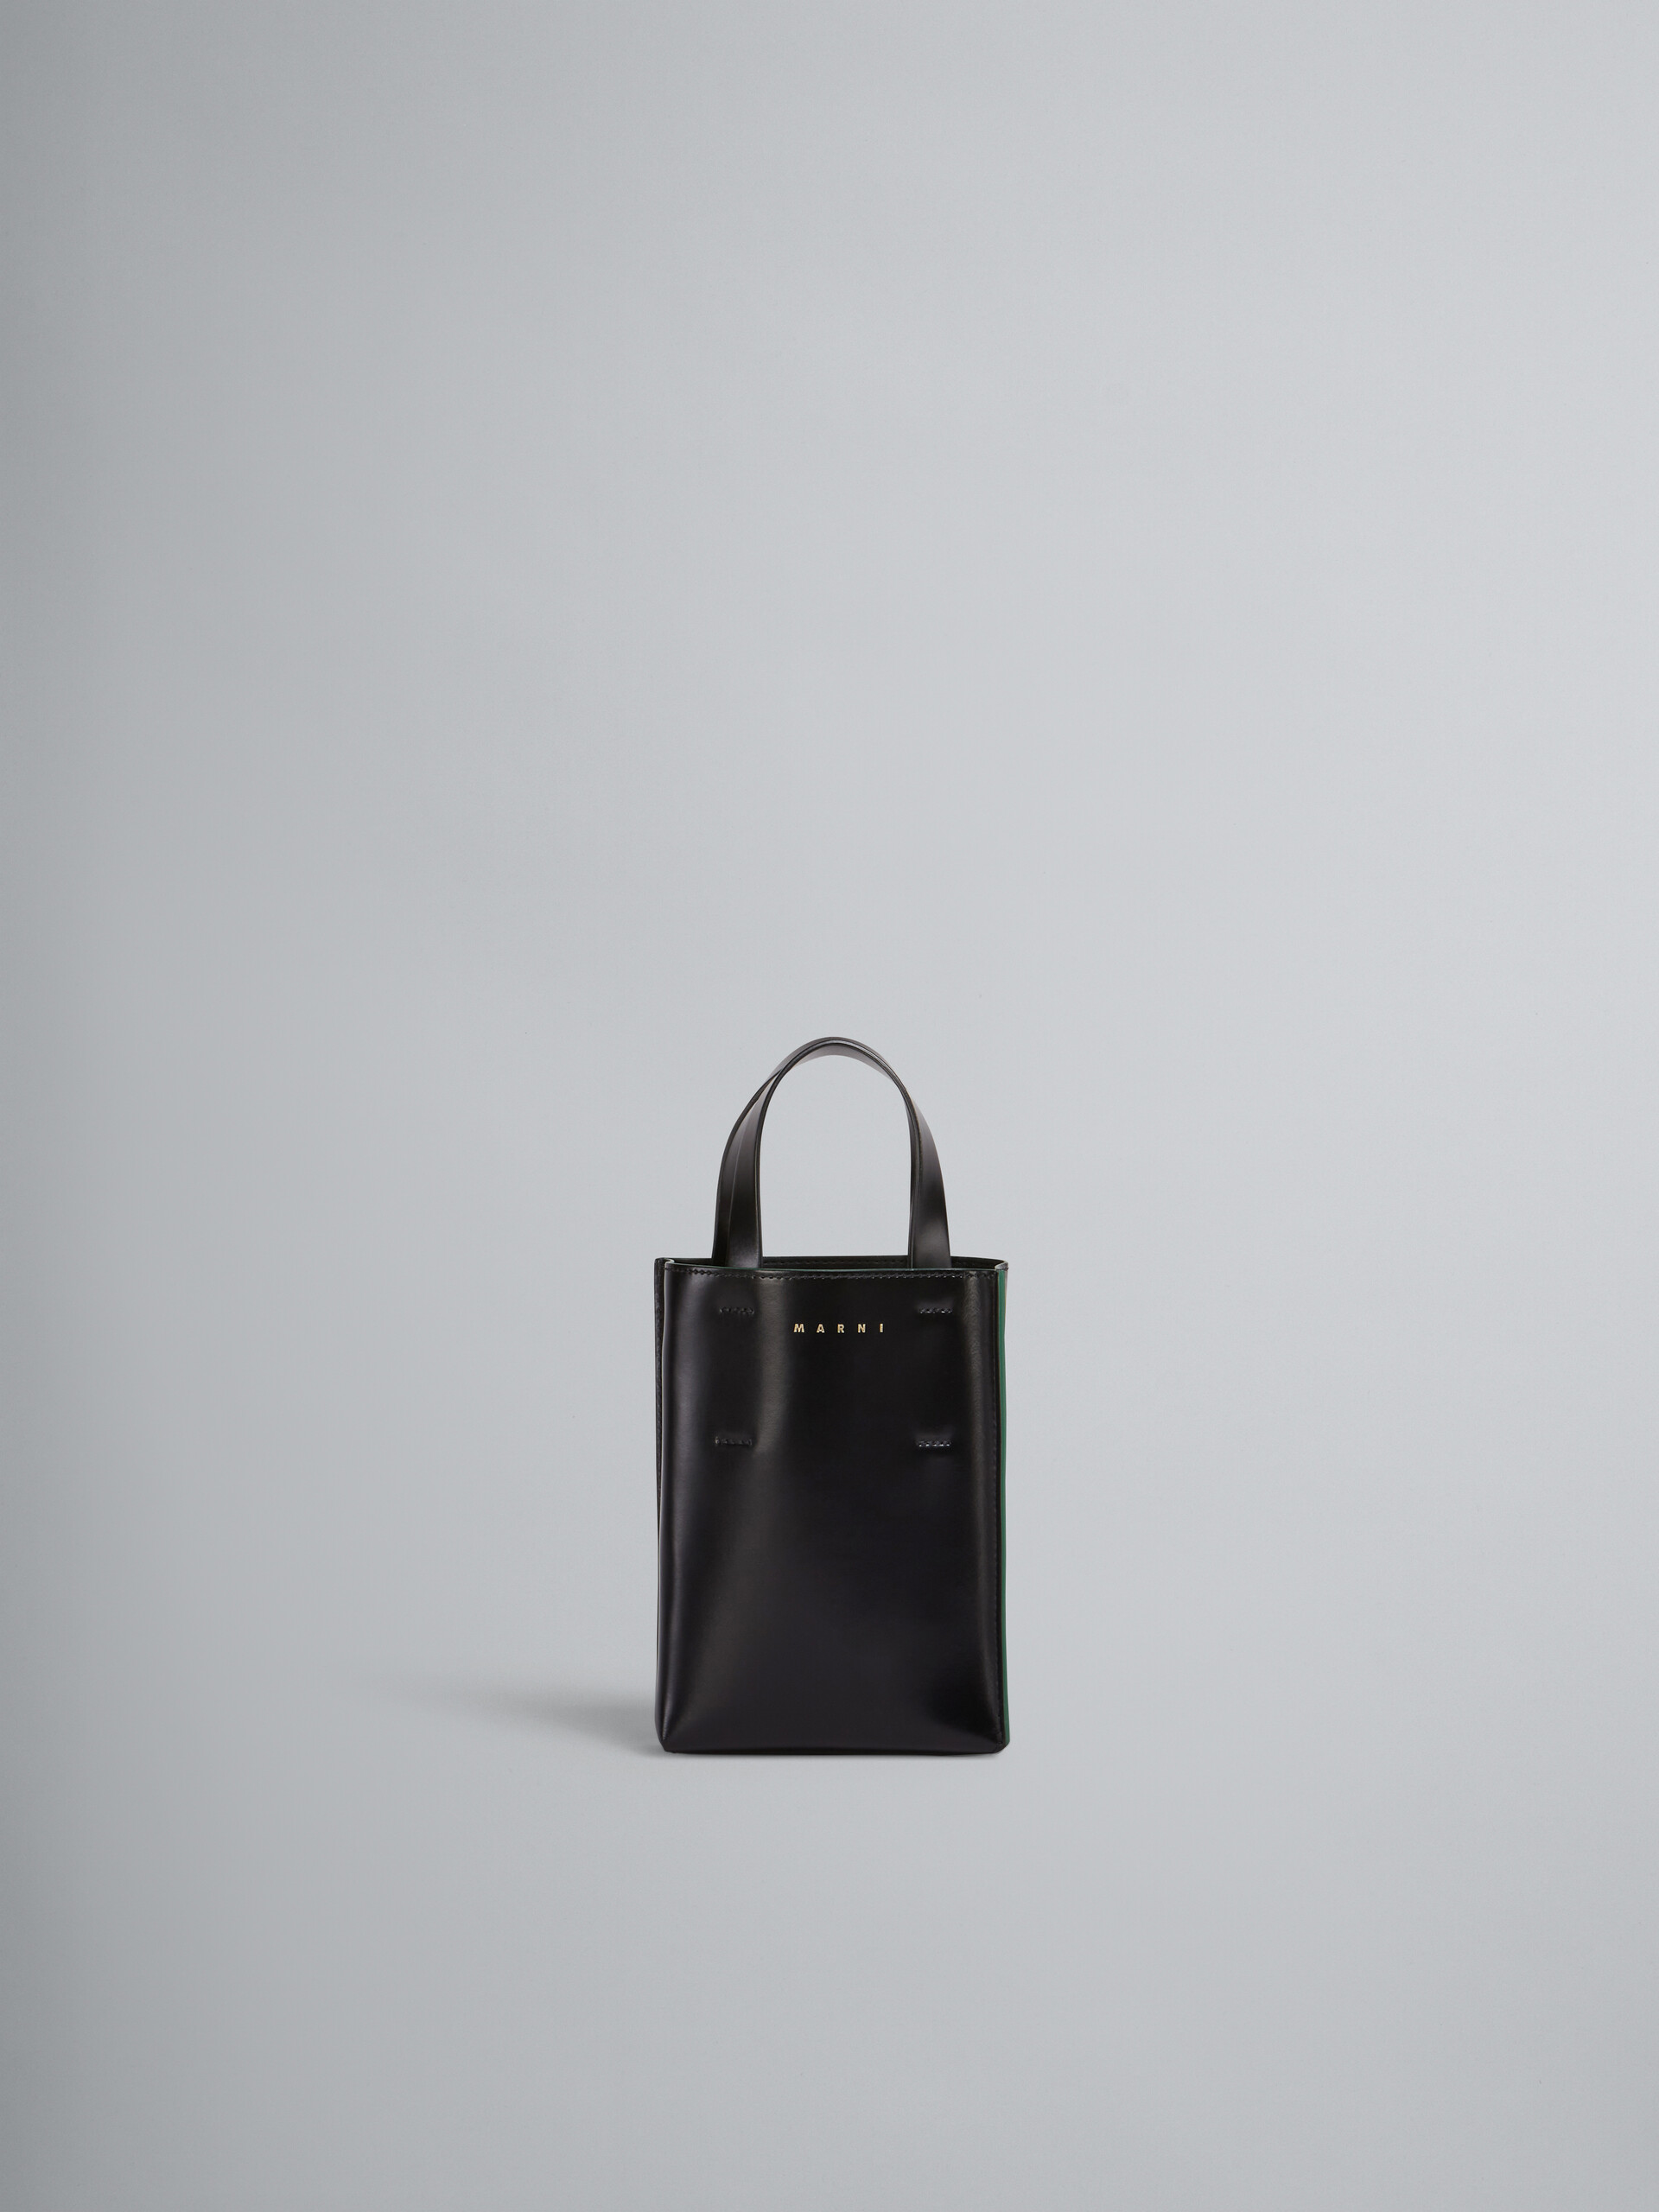 Nano MUSEO shopping bag in black shiny smooth calfskin with shoulder strap - Shopping Bags - Image 1